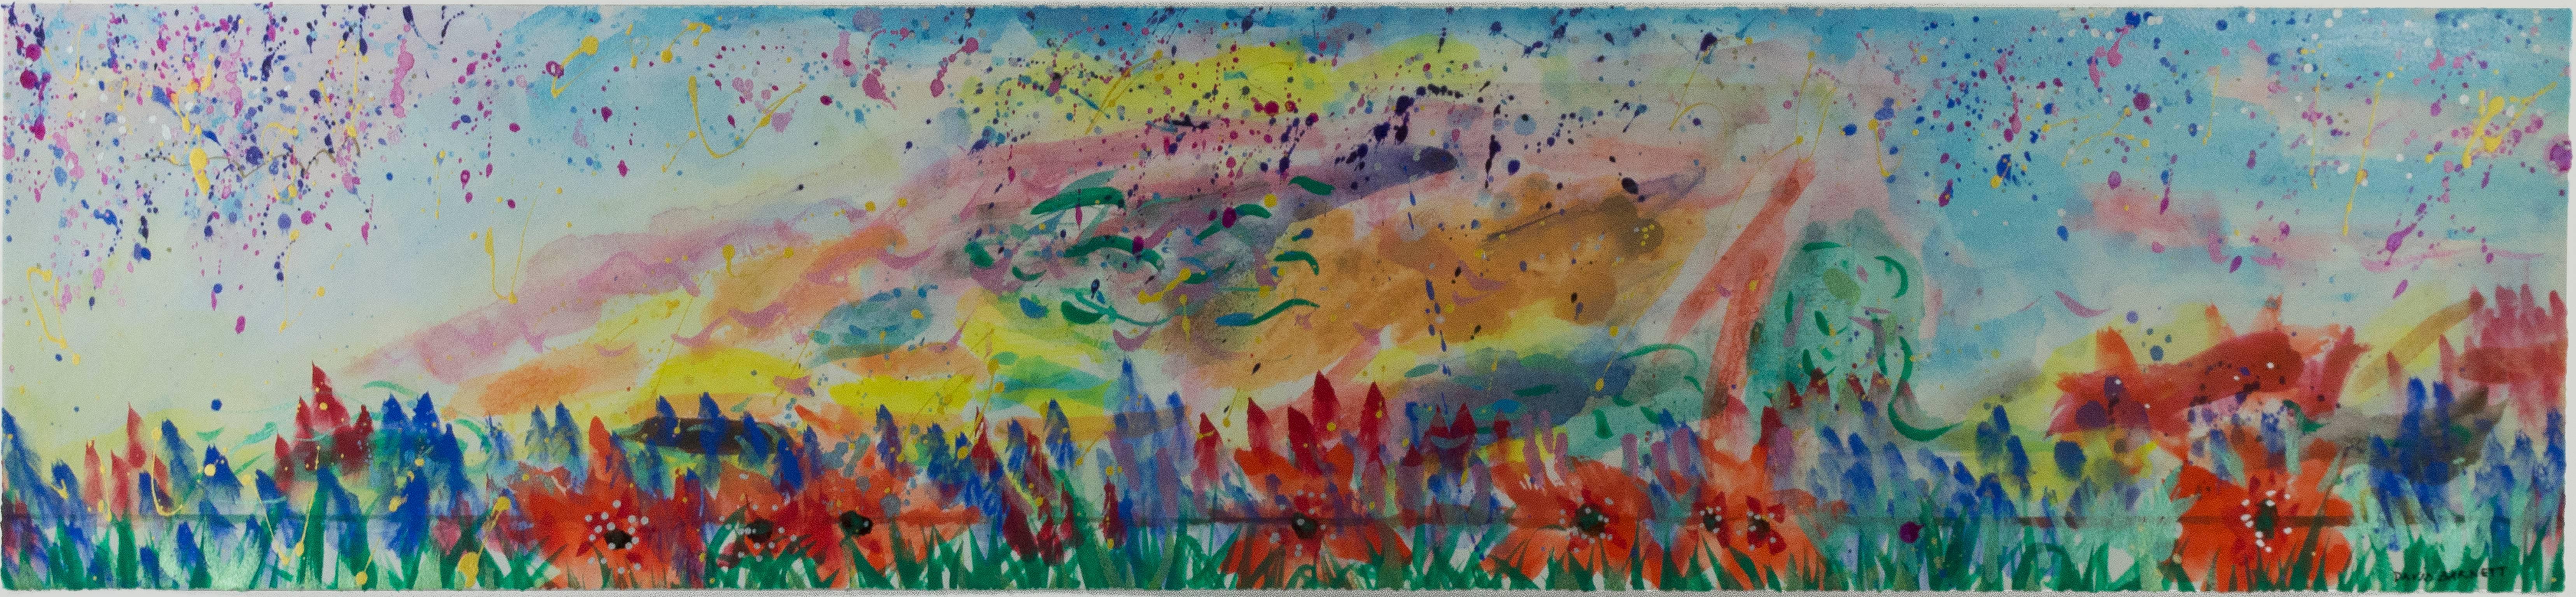 "Abstract with Grass and Poppies II" is an original watercolor, iridescent acrylic, and ink painting on watercolor paper by David Barnett. The artist signed the piece lower right. This piece may be sold with "Abstract with Grass and Poppies I" as a